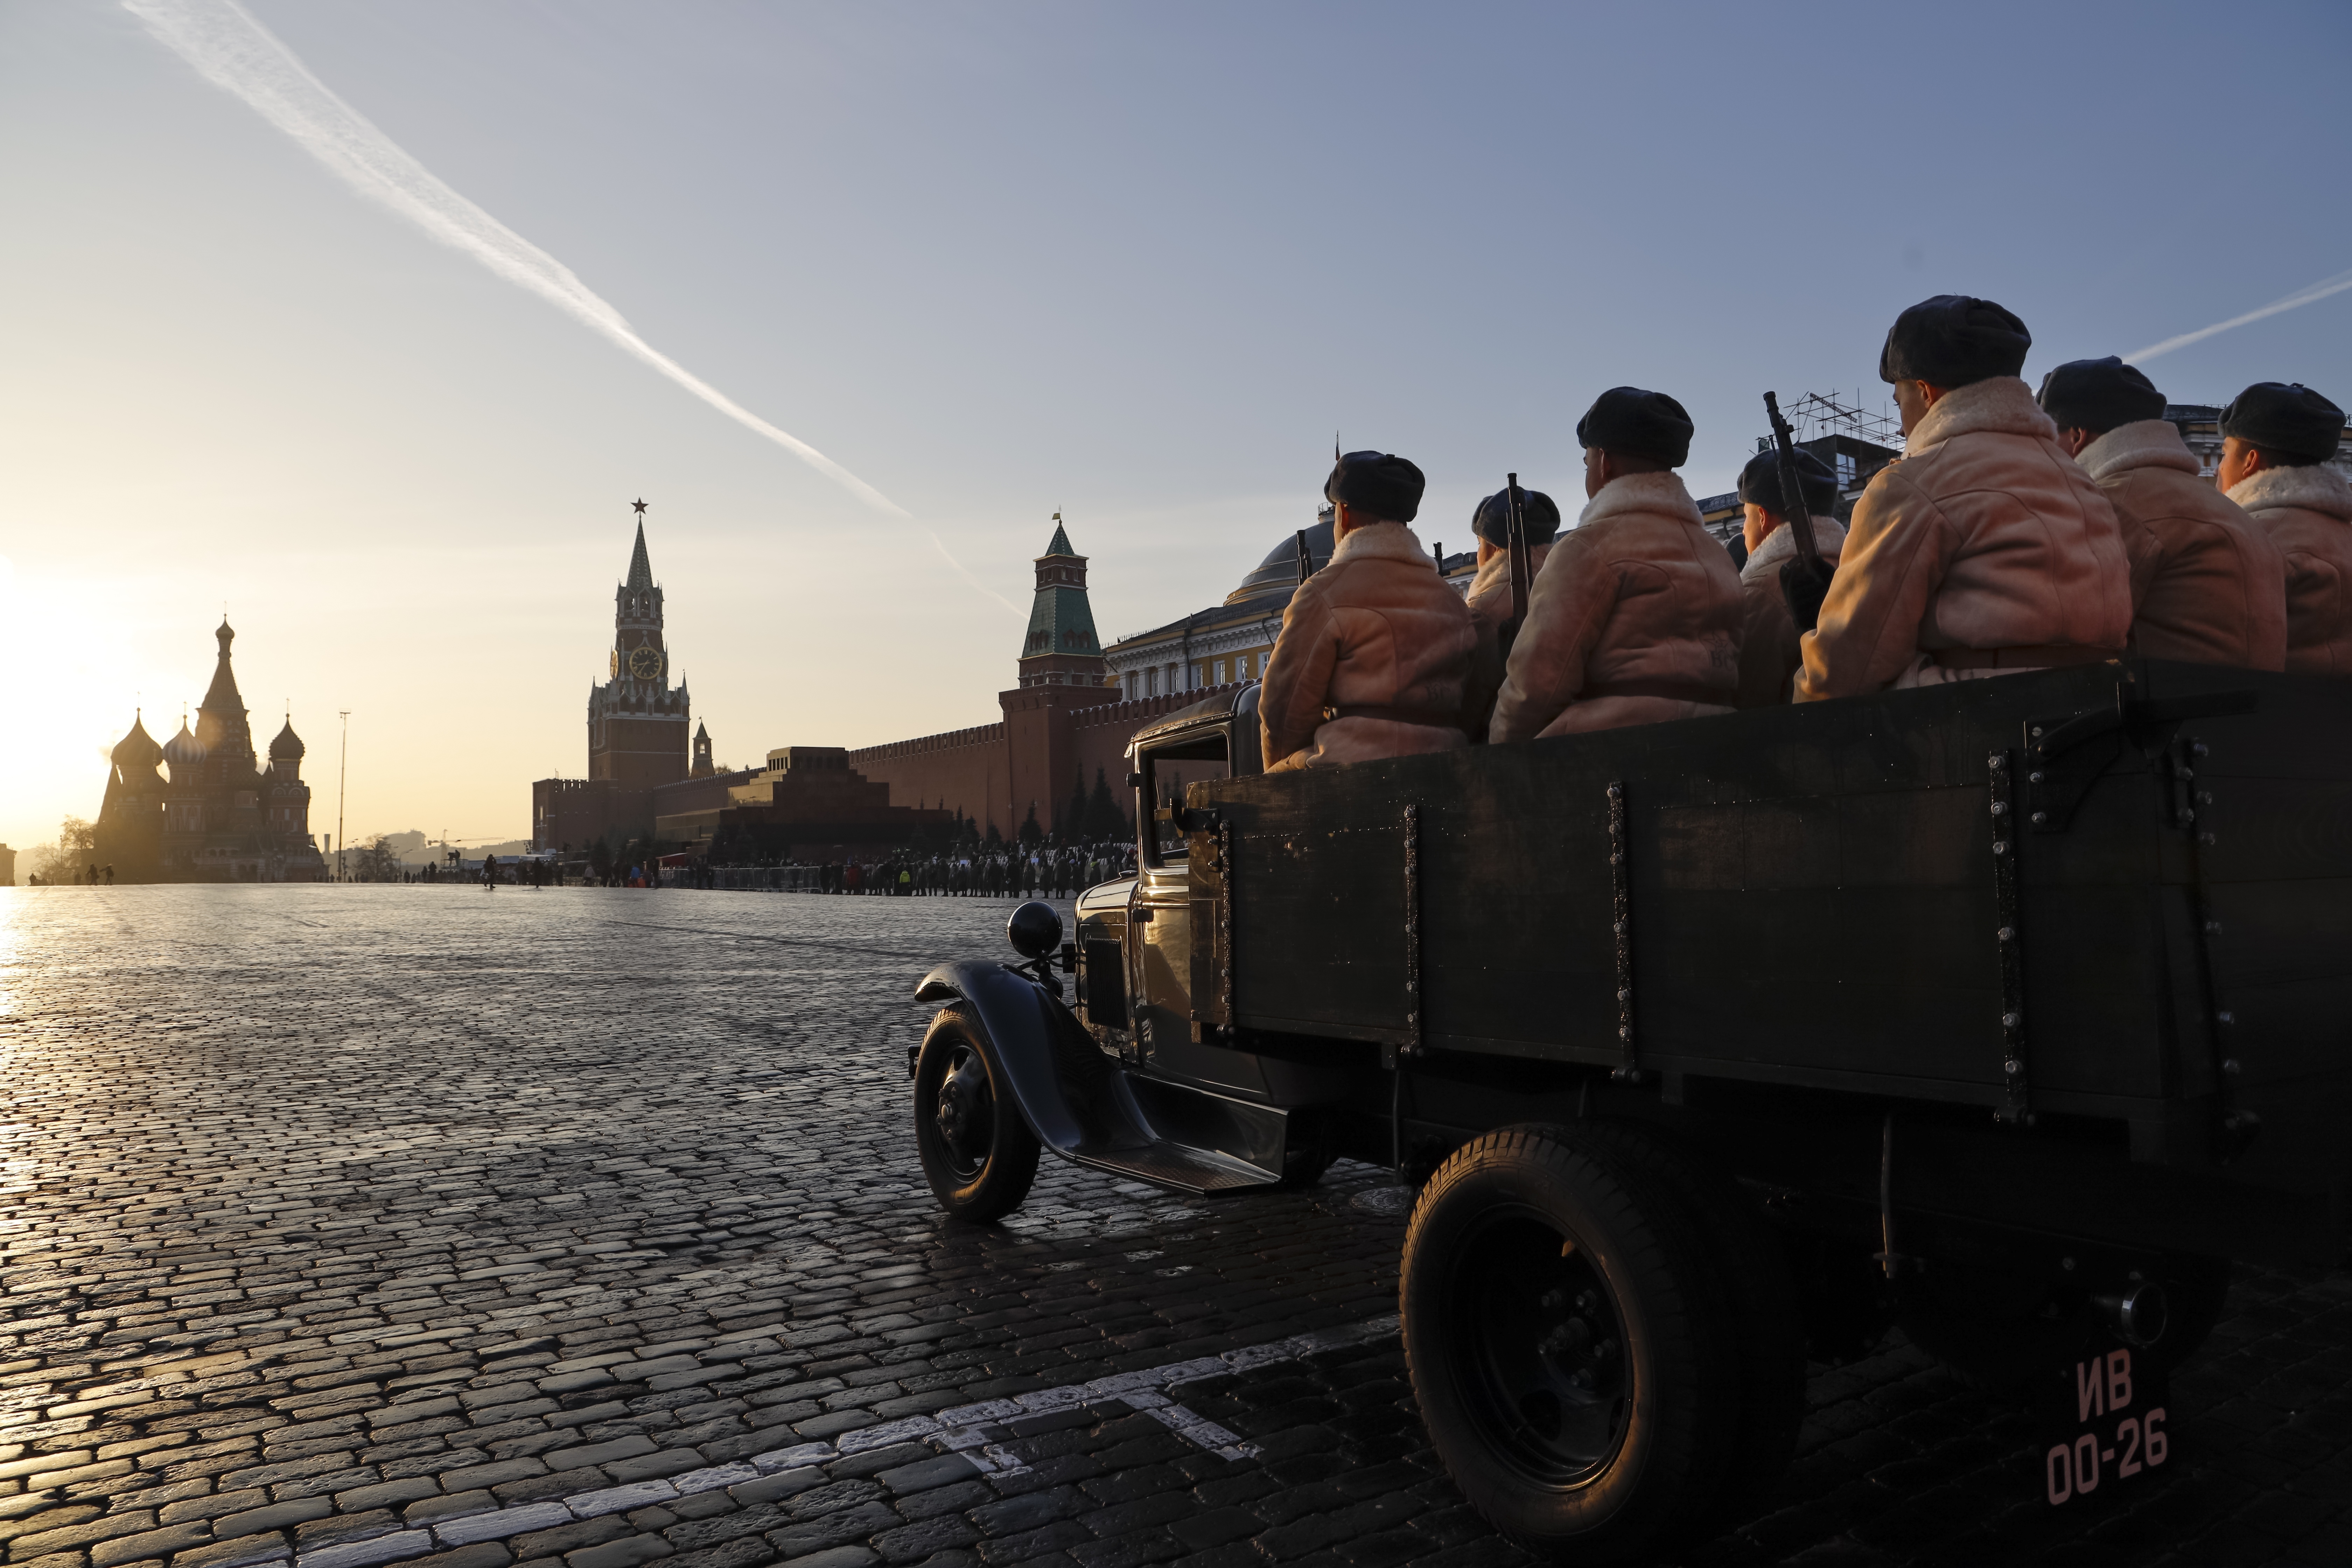 Russian soldiers dressed in Red Army World War II uniform sit in the back of a GAZ AA during the Nov. 7 parade, with St. Basil Cathedral and the Spasskaya Tower in the background, in Red Square, in Moscow, Russia, Wednesday, Nov. 7, 2018. The parade marked the 77th anniversary of a World War II historic parade in Red Square and honored the participants in the Nov. 7, 1941 parade who headed directly to the front lines to defend Moscow from the Nazi forces. (AP Photo/Alexander Zemlianichenko)